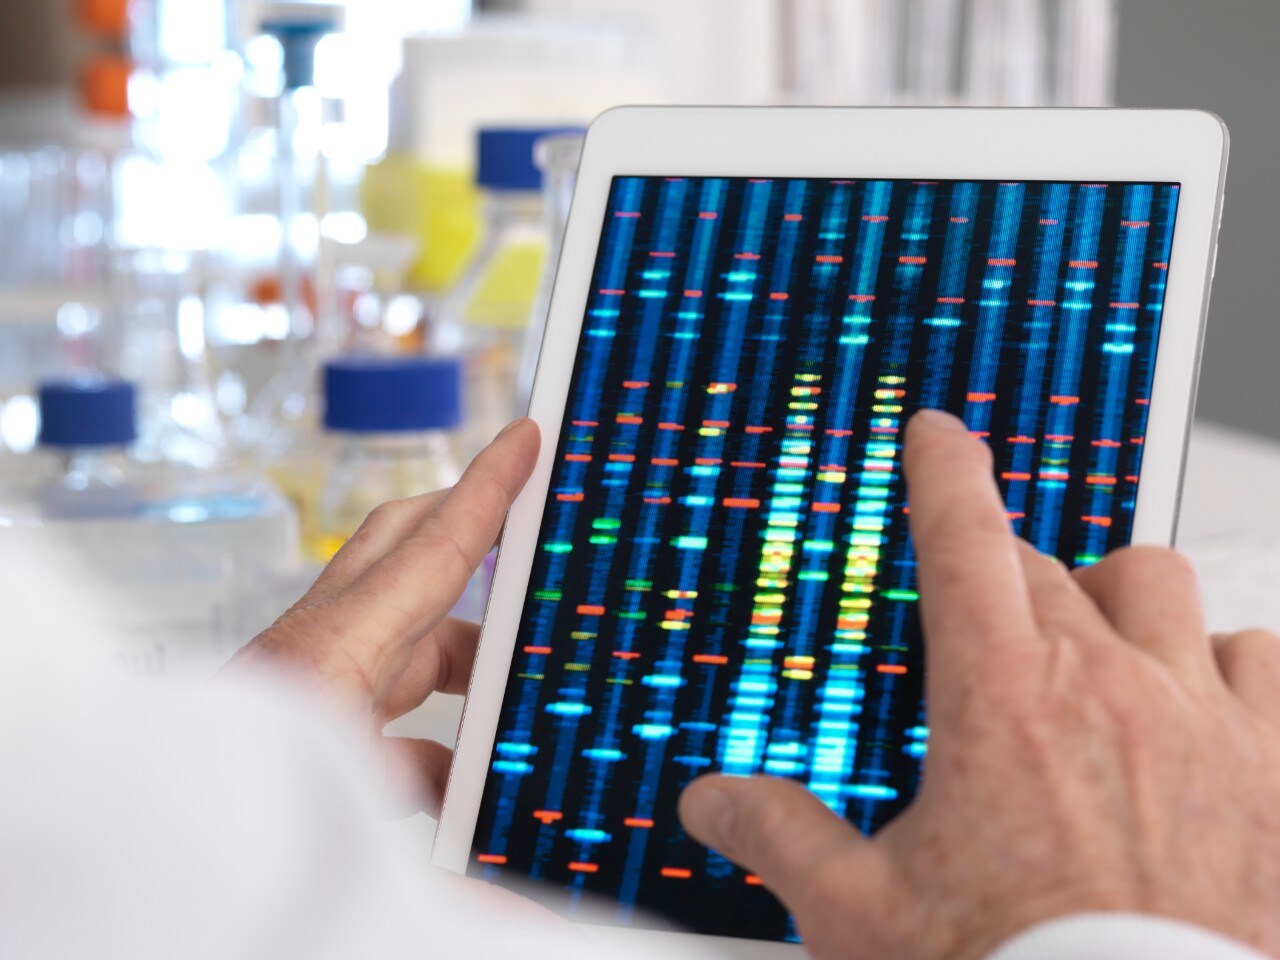 MODEL RELEASED. Scientist viewing results of a genetic test on a digital tablet.